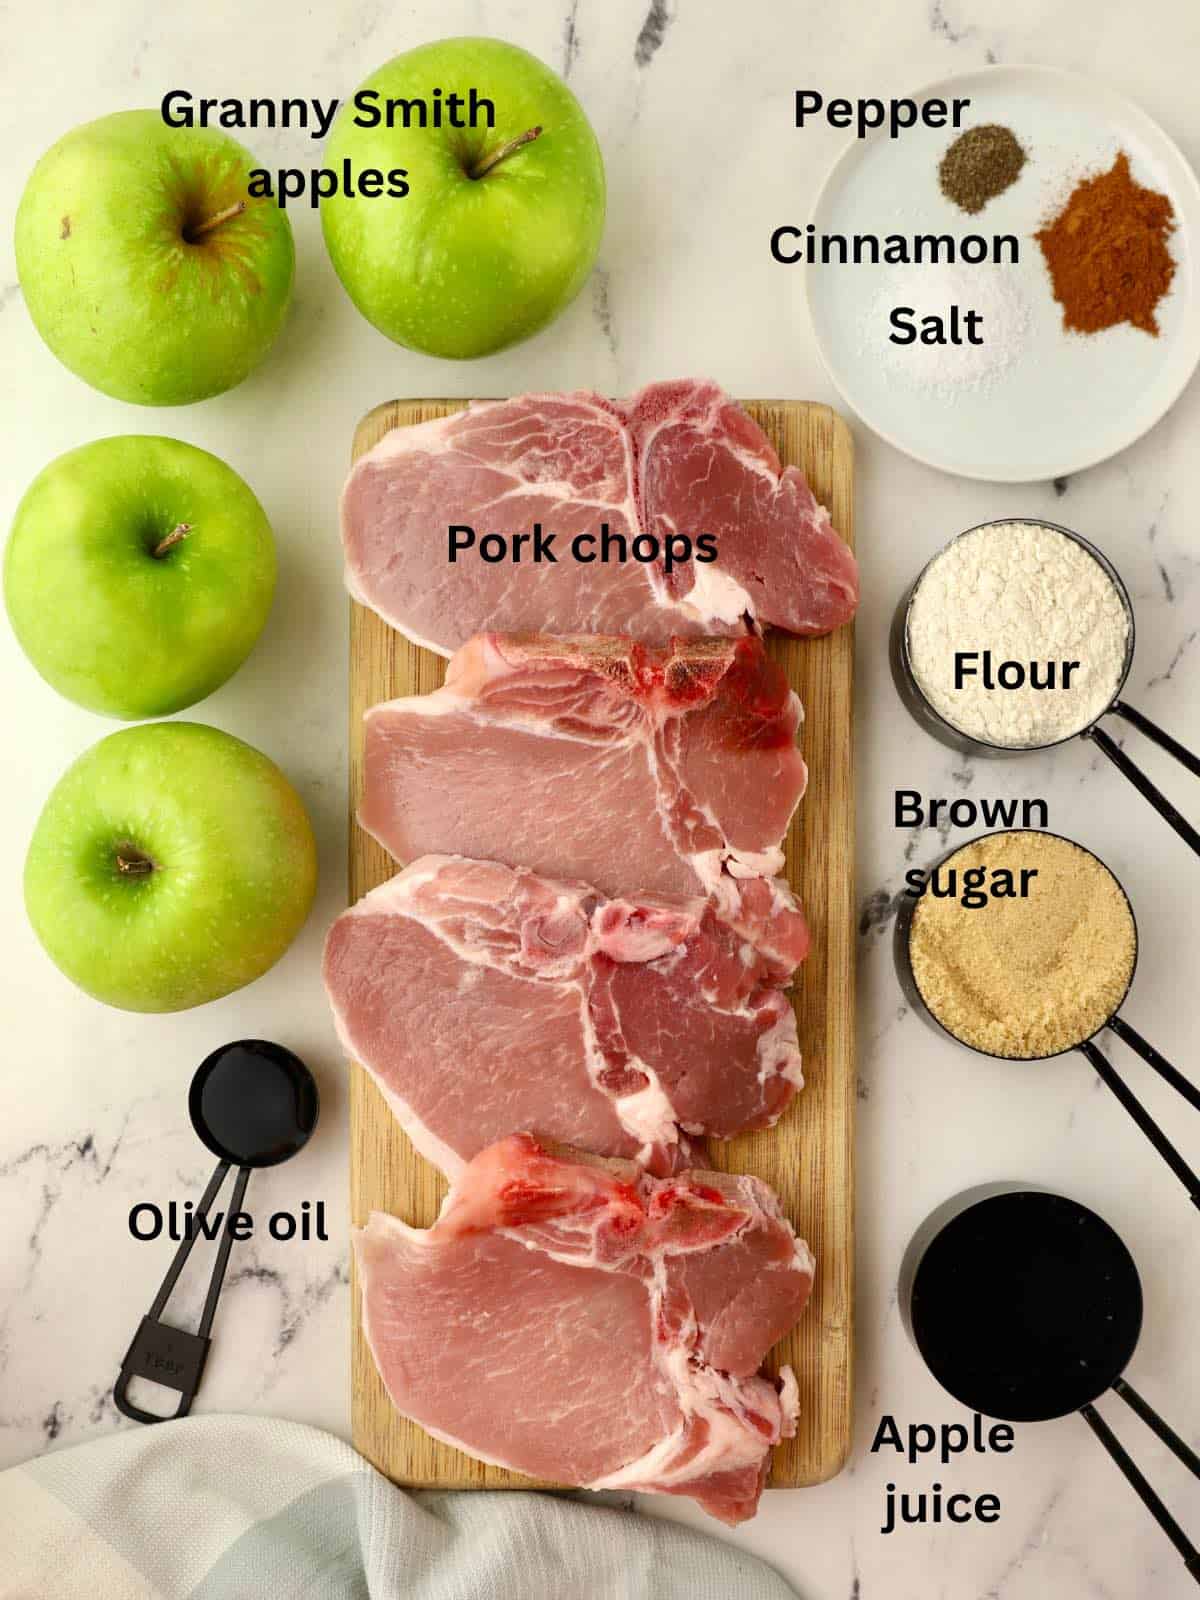 Raw pork chops on a cutting board along with apples and other ingredients. 